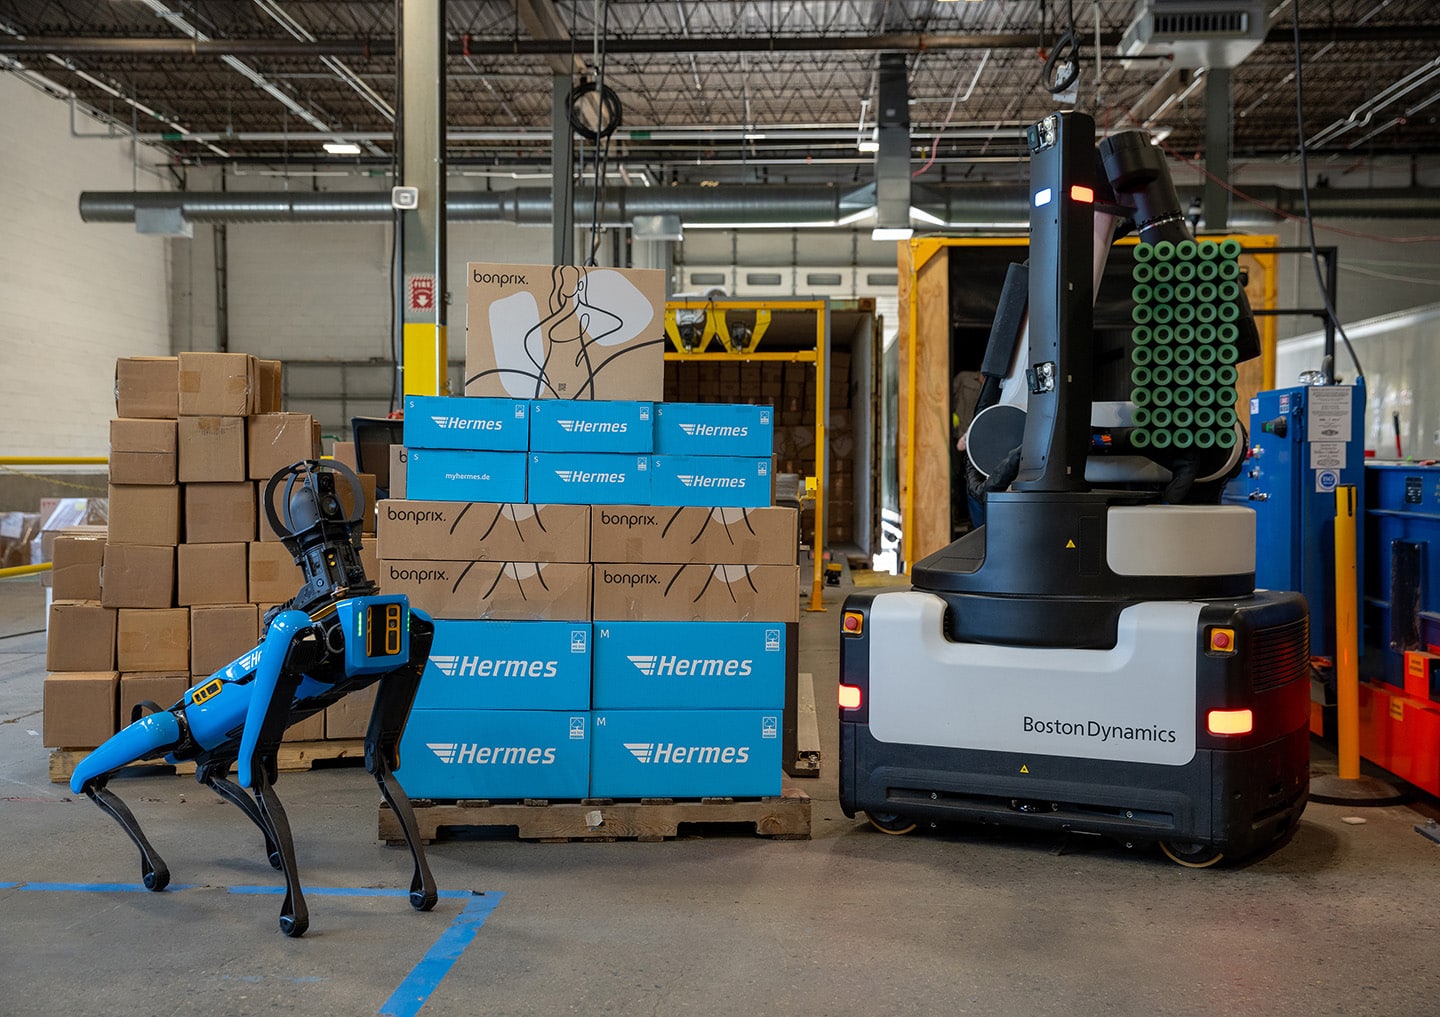 Otto Group Teams Up with Boston Dynamics to Strengthen Logistics Operations